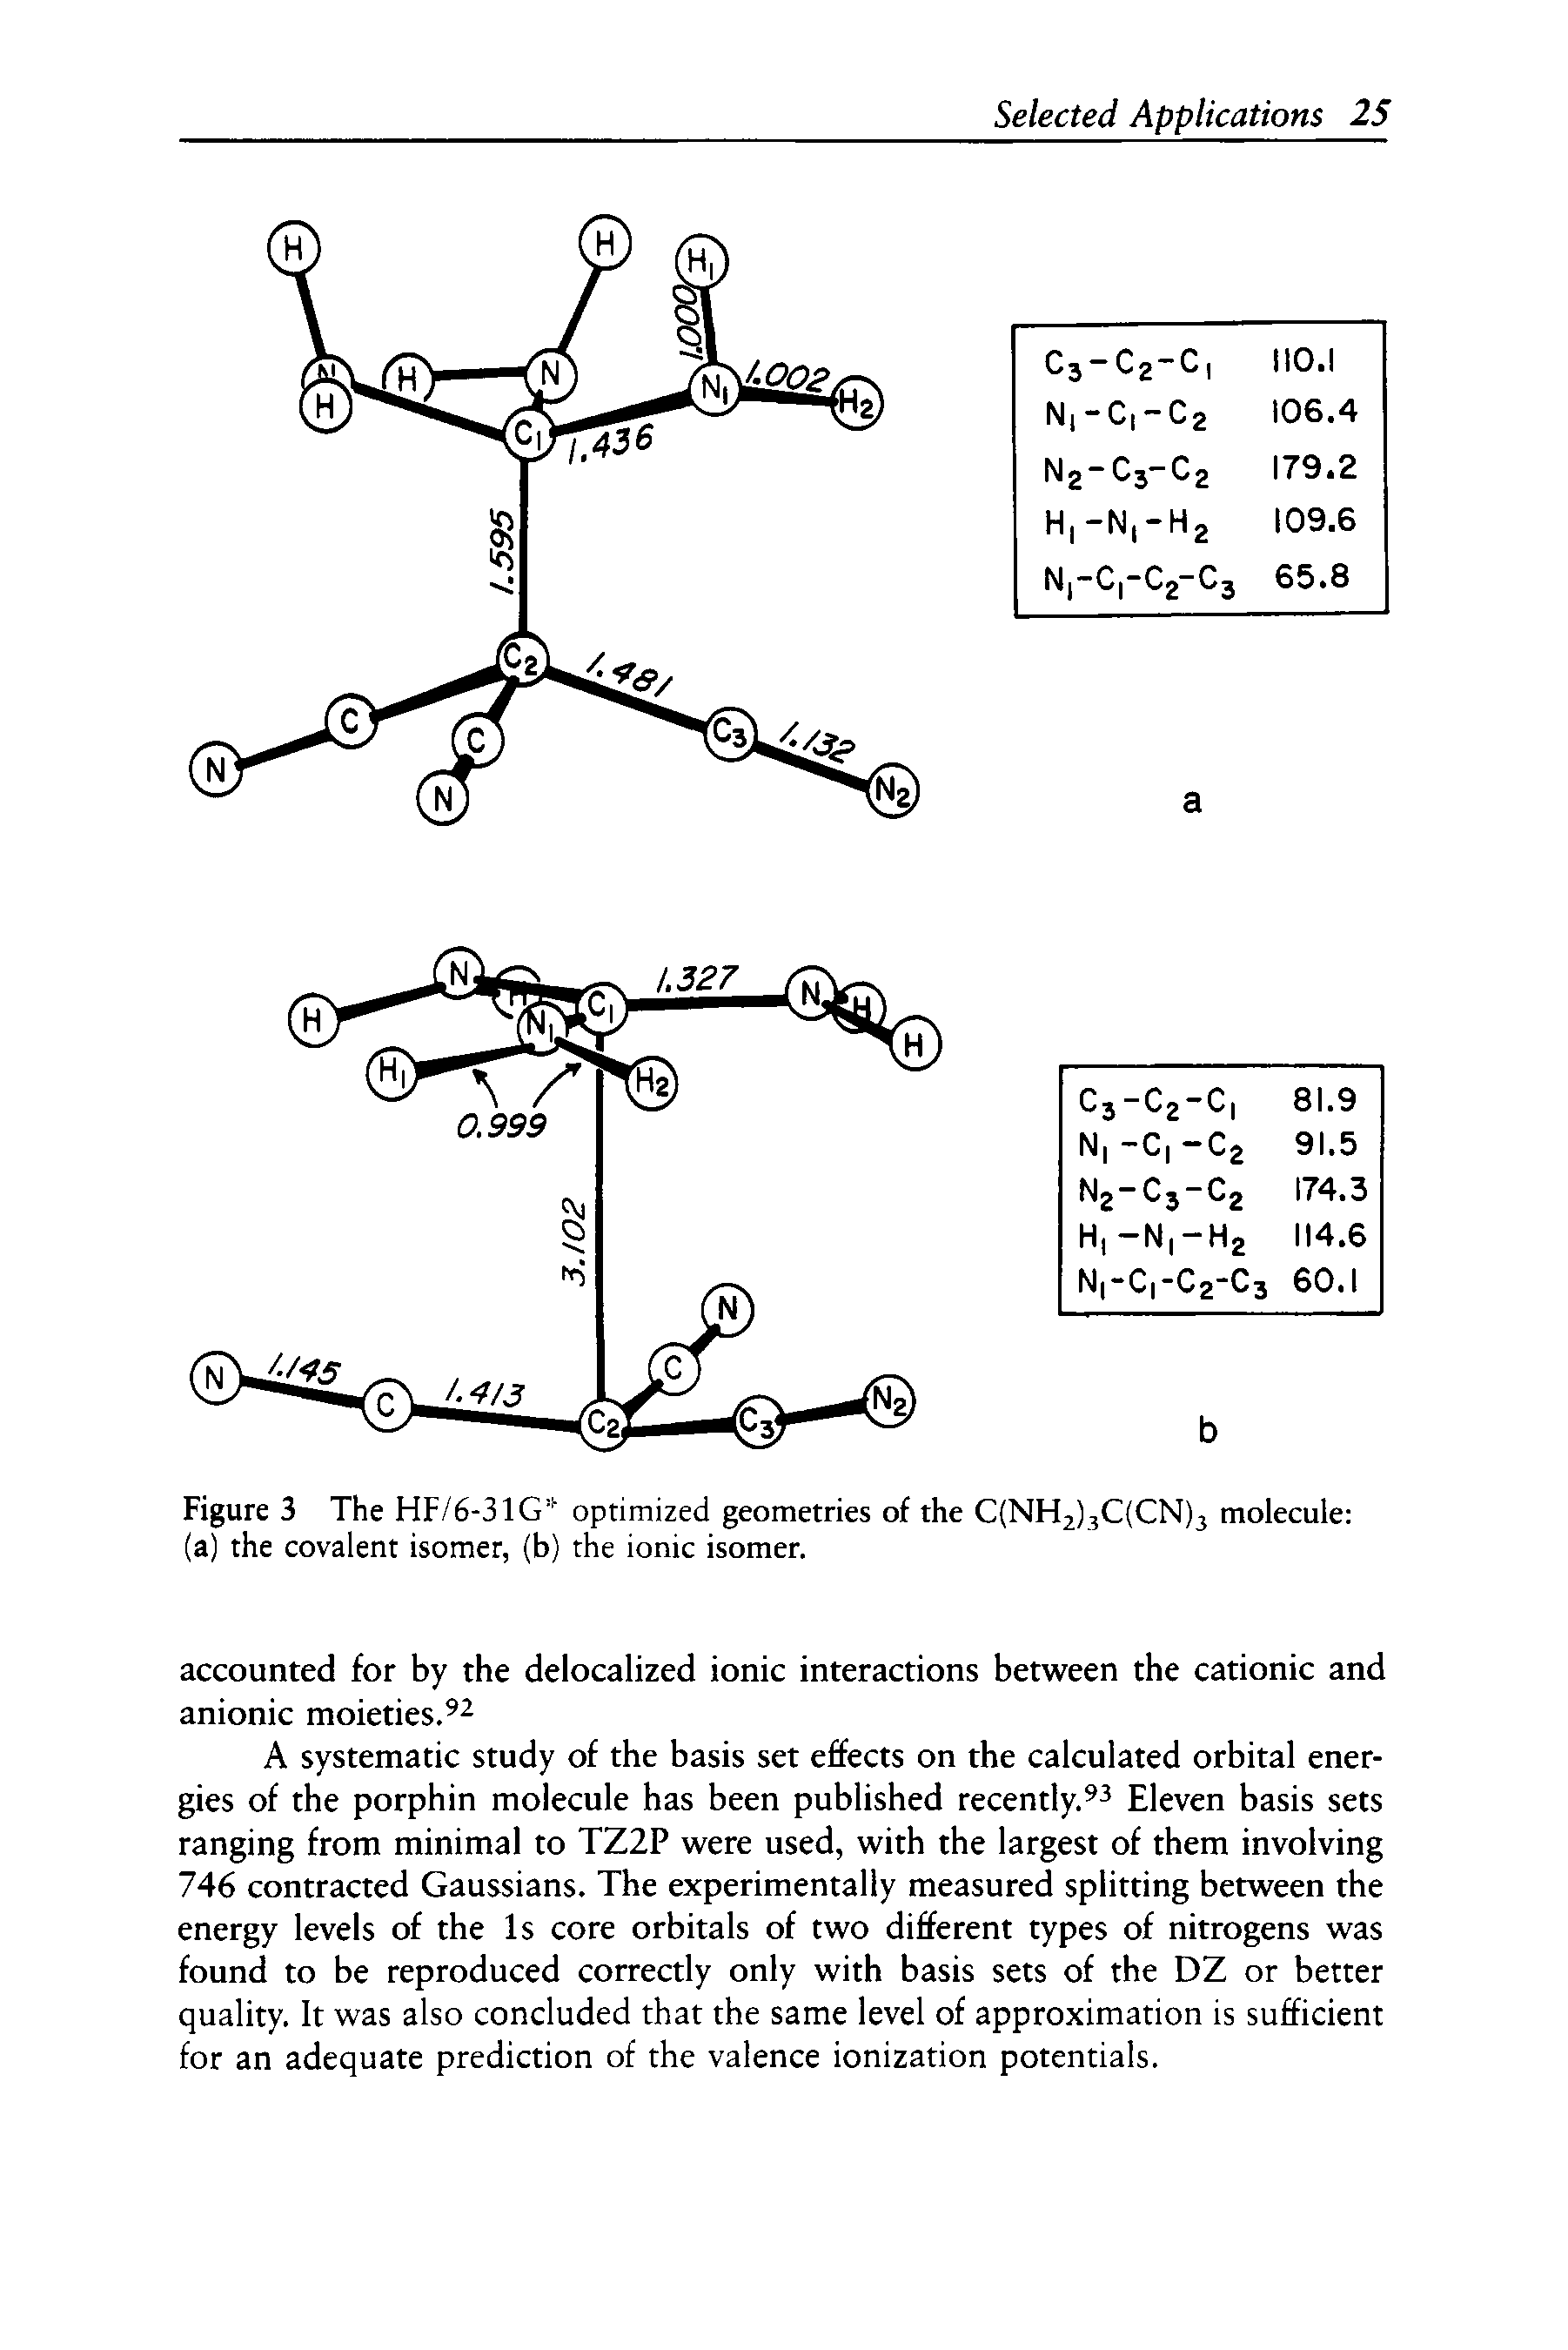 Figure 3 The HF/6-31G optimized geometries of the C(NH2)3C(CN)3 molecule (a) the covalent isomer, (b) the ionic isomer.